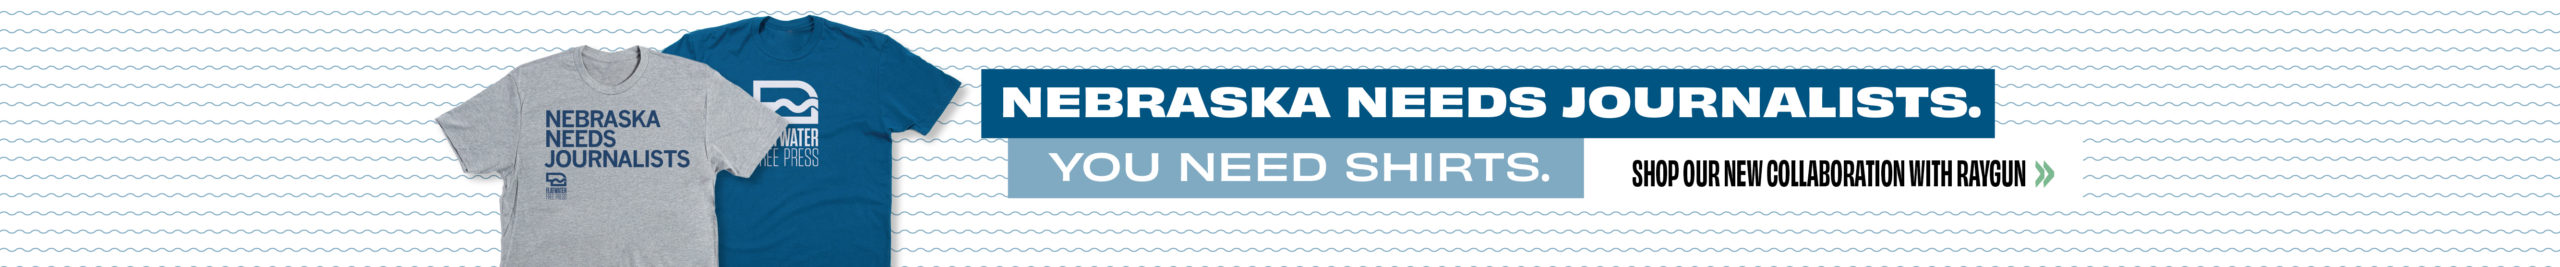 Nebraska needs journalists. You need shirts. Shop our new collaboration with Raygun.